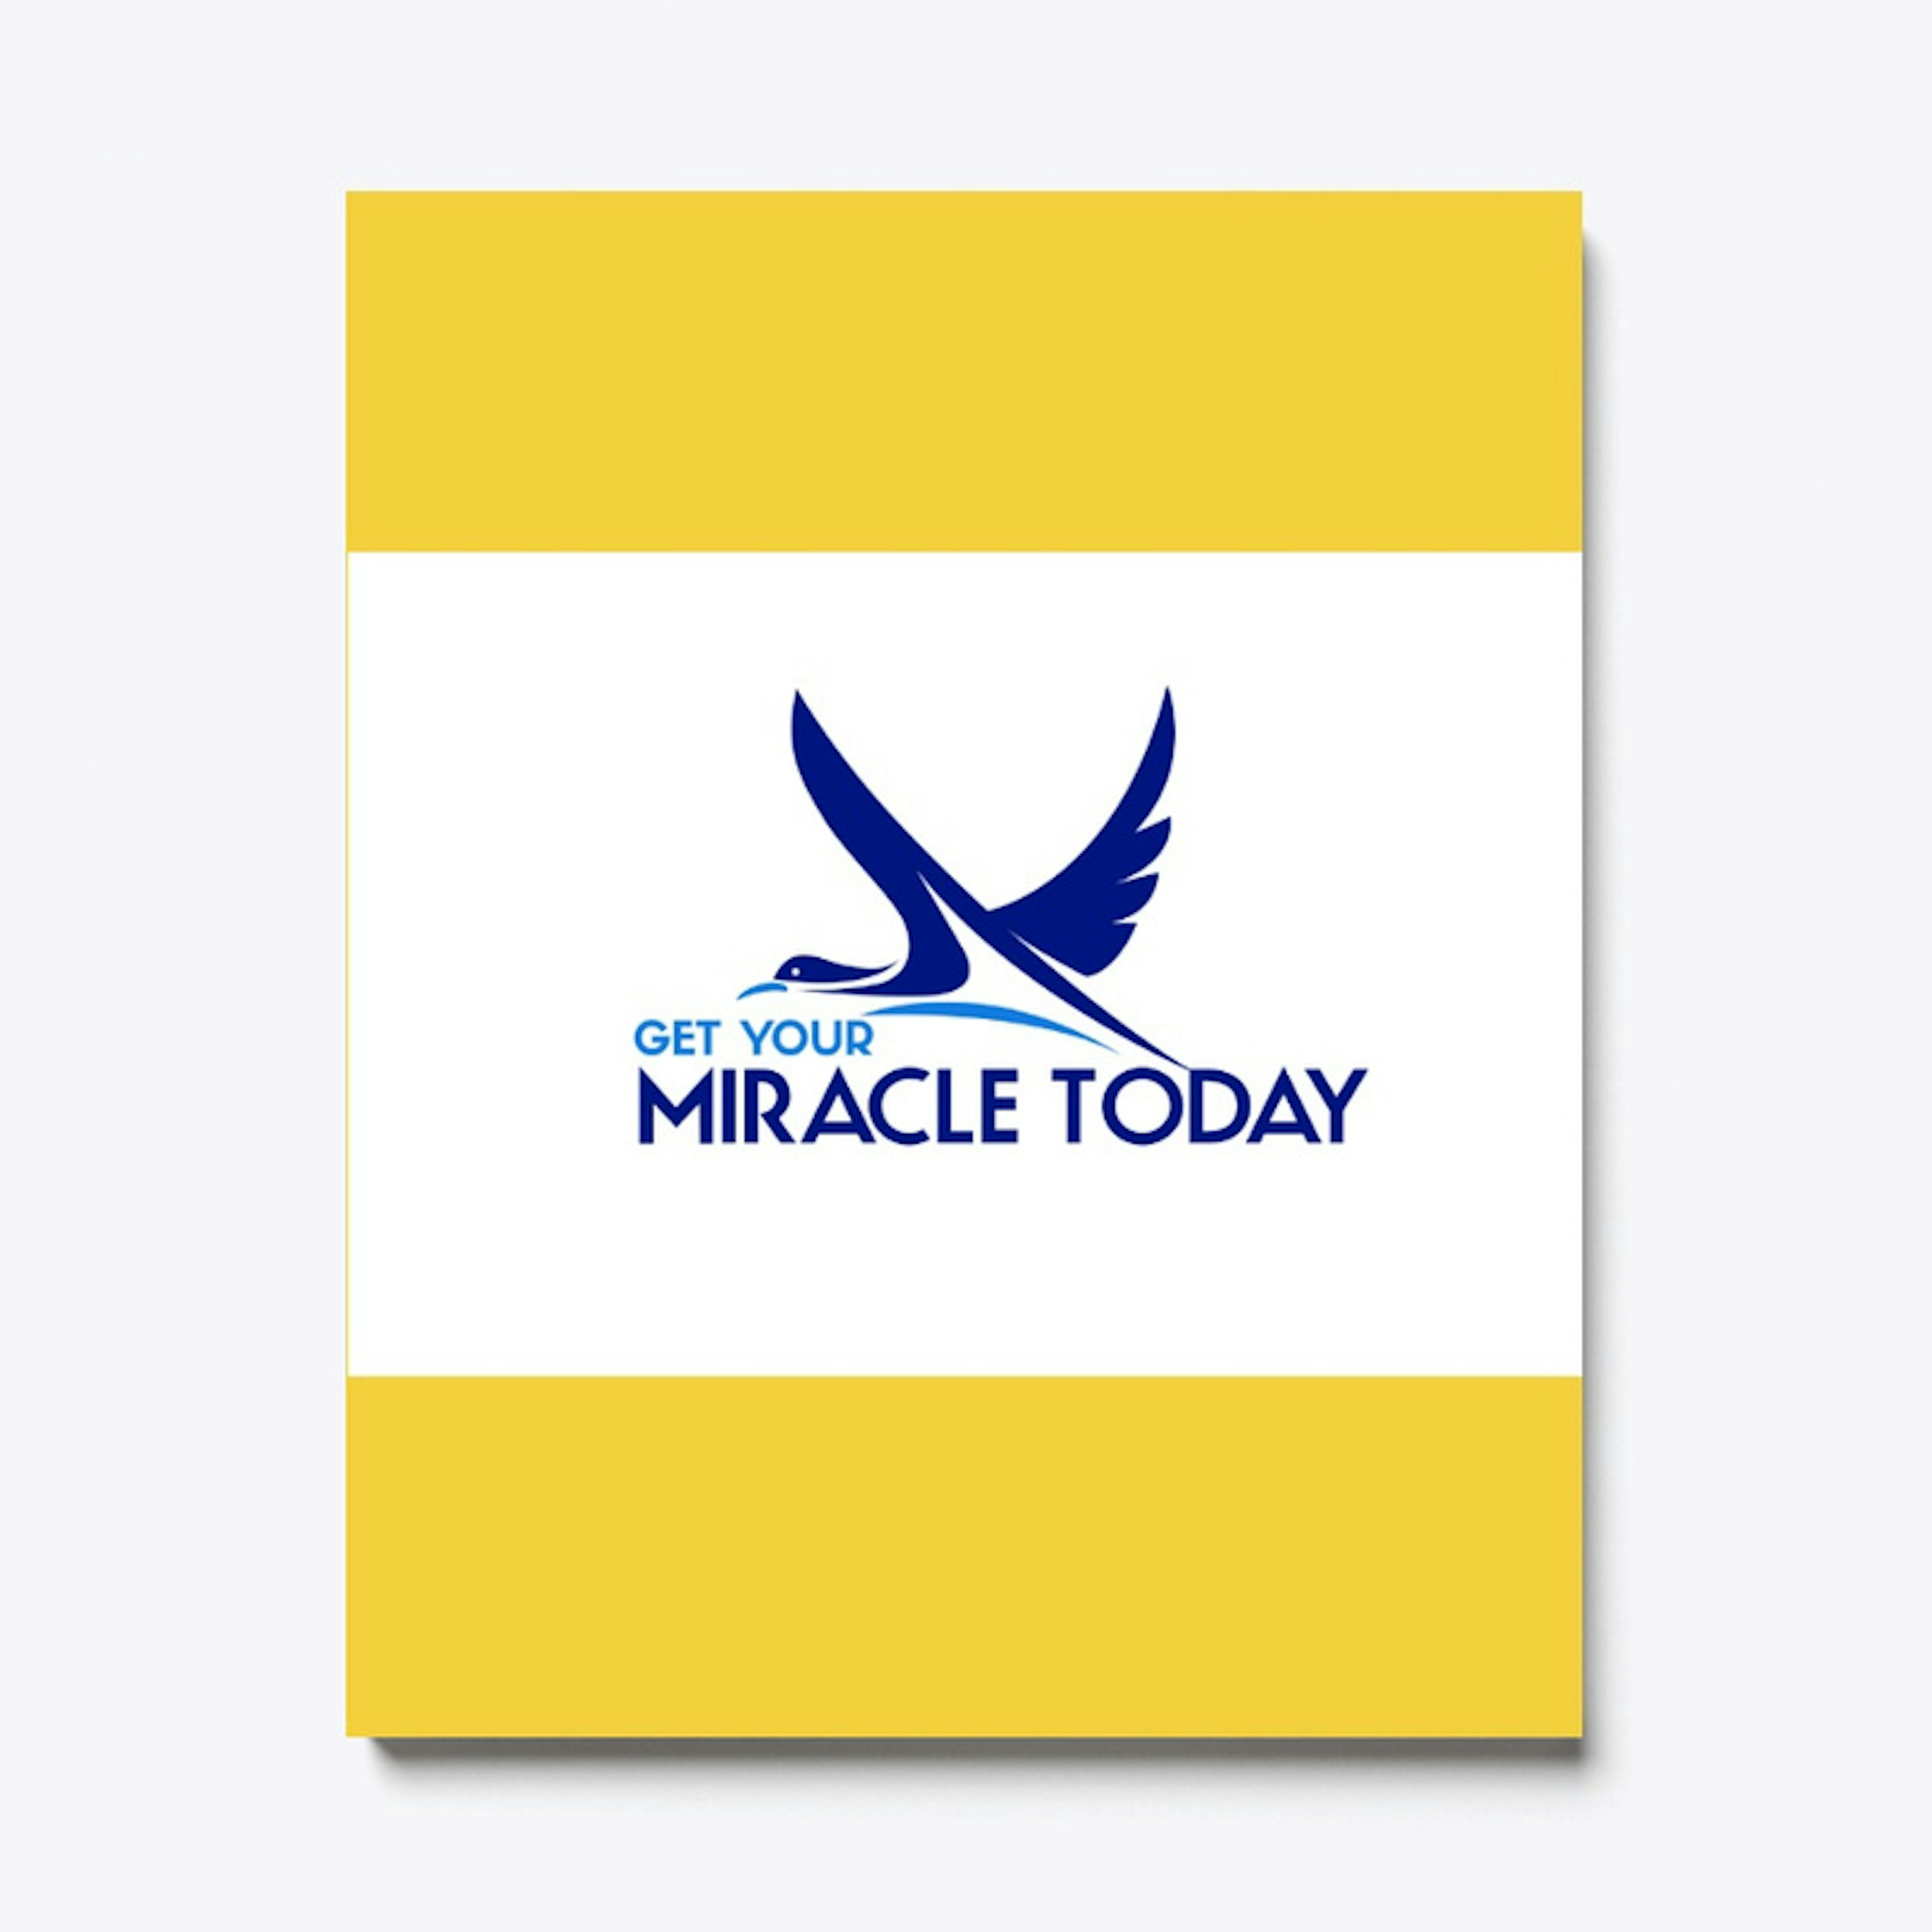 Get Your Miracle Today